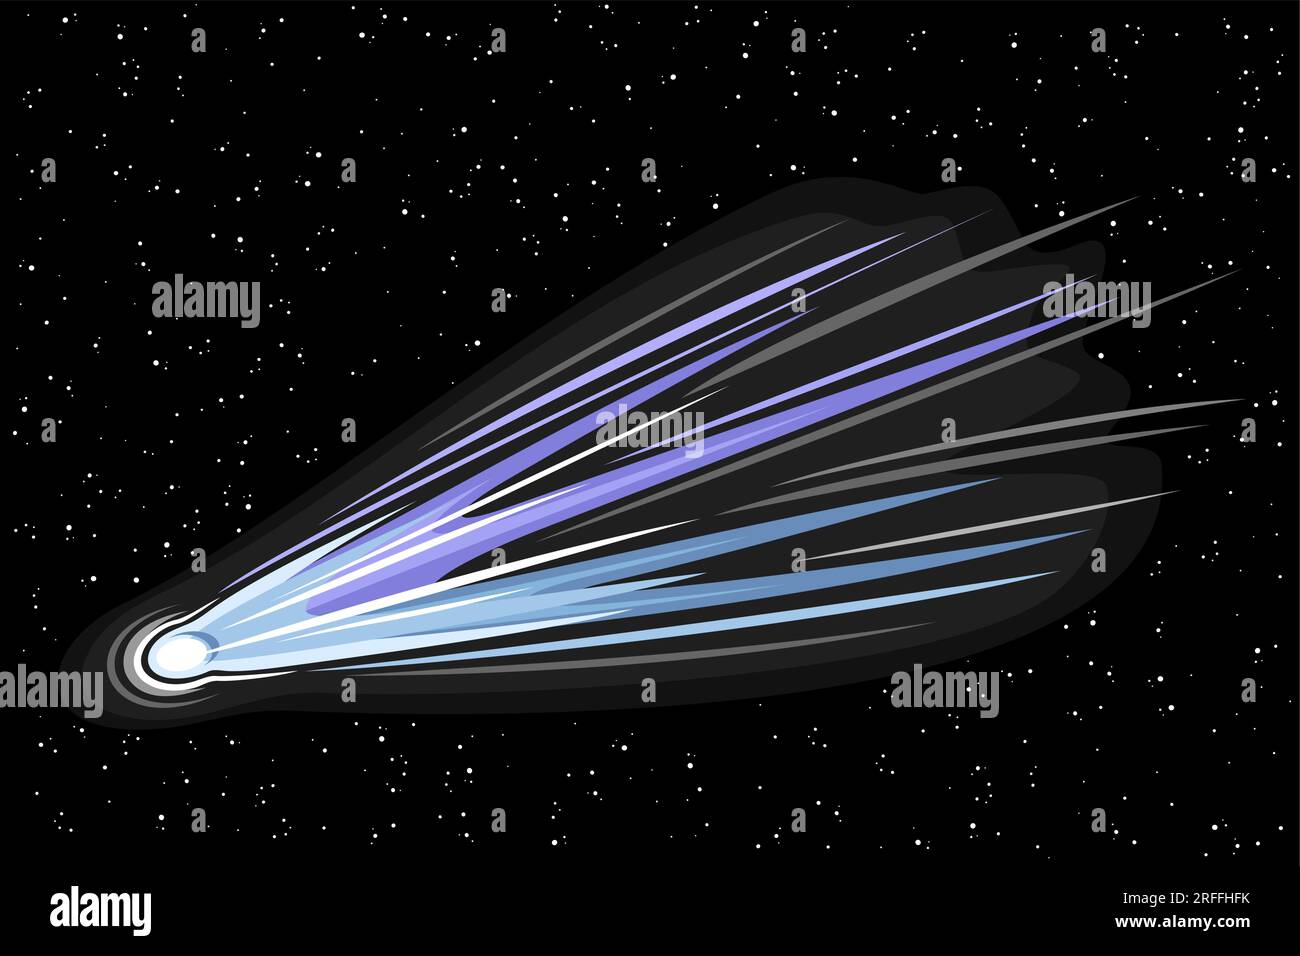 Vector illustration of Comet, horizontal astronomical poster with cartoon design shooting blue ice comet, line art cosmo print with futuristic purple Stock Vector